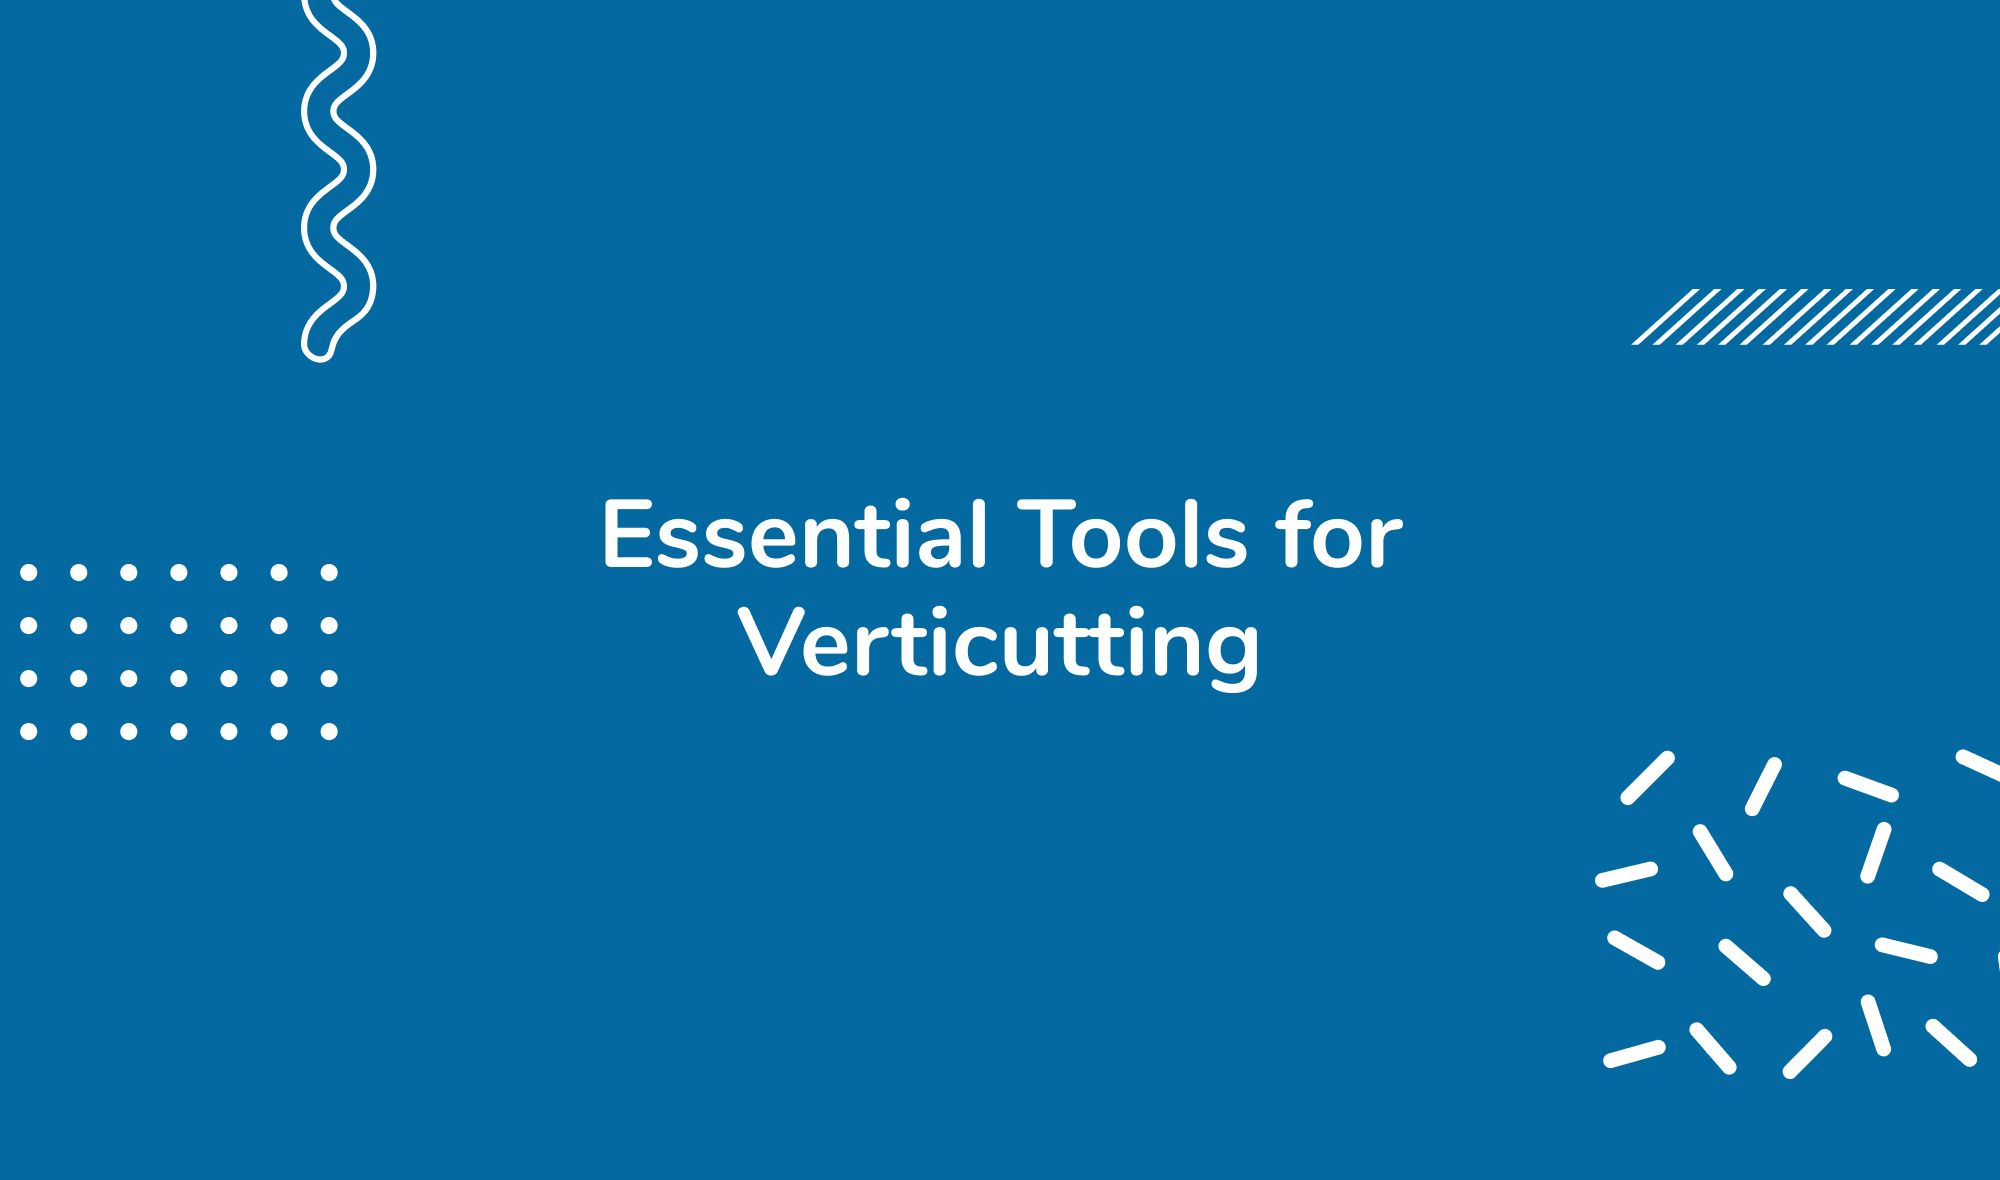 Essential Tools for Verticutting: Introducing the Verticutter and Vertical Mower